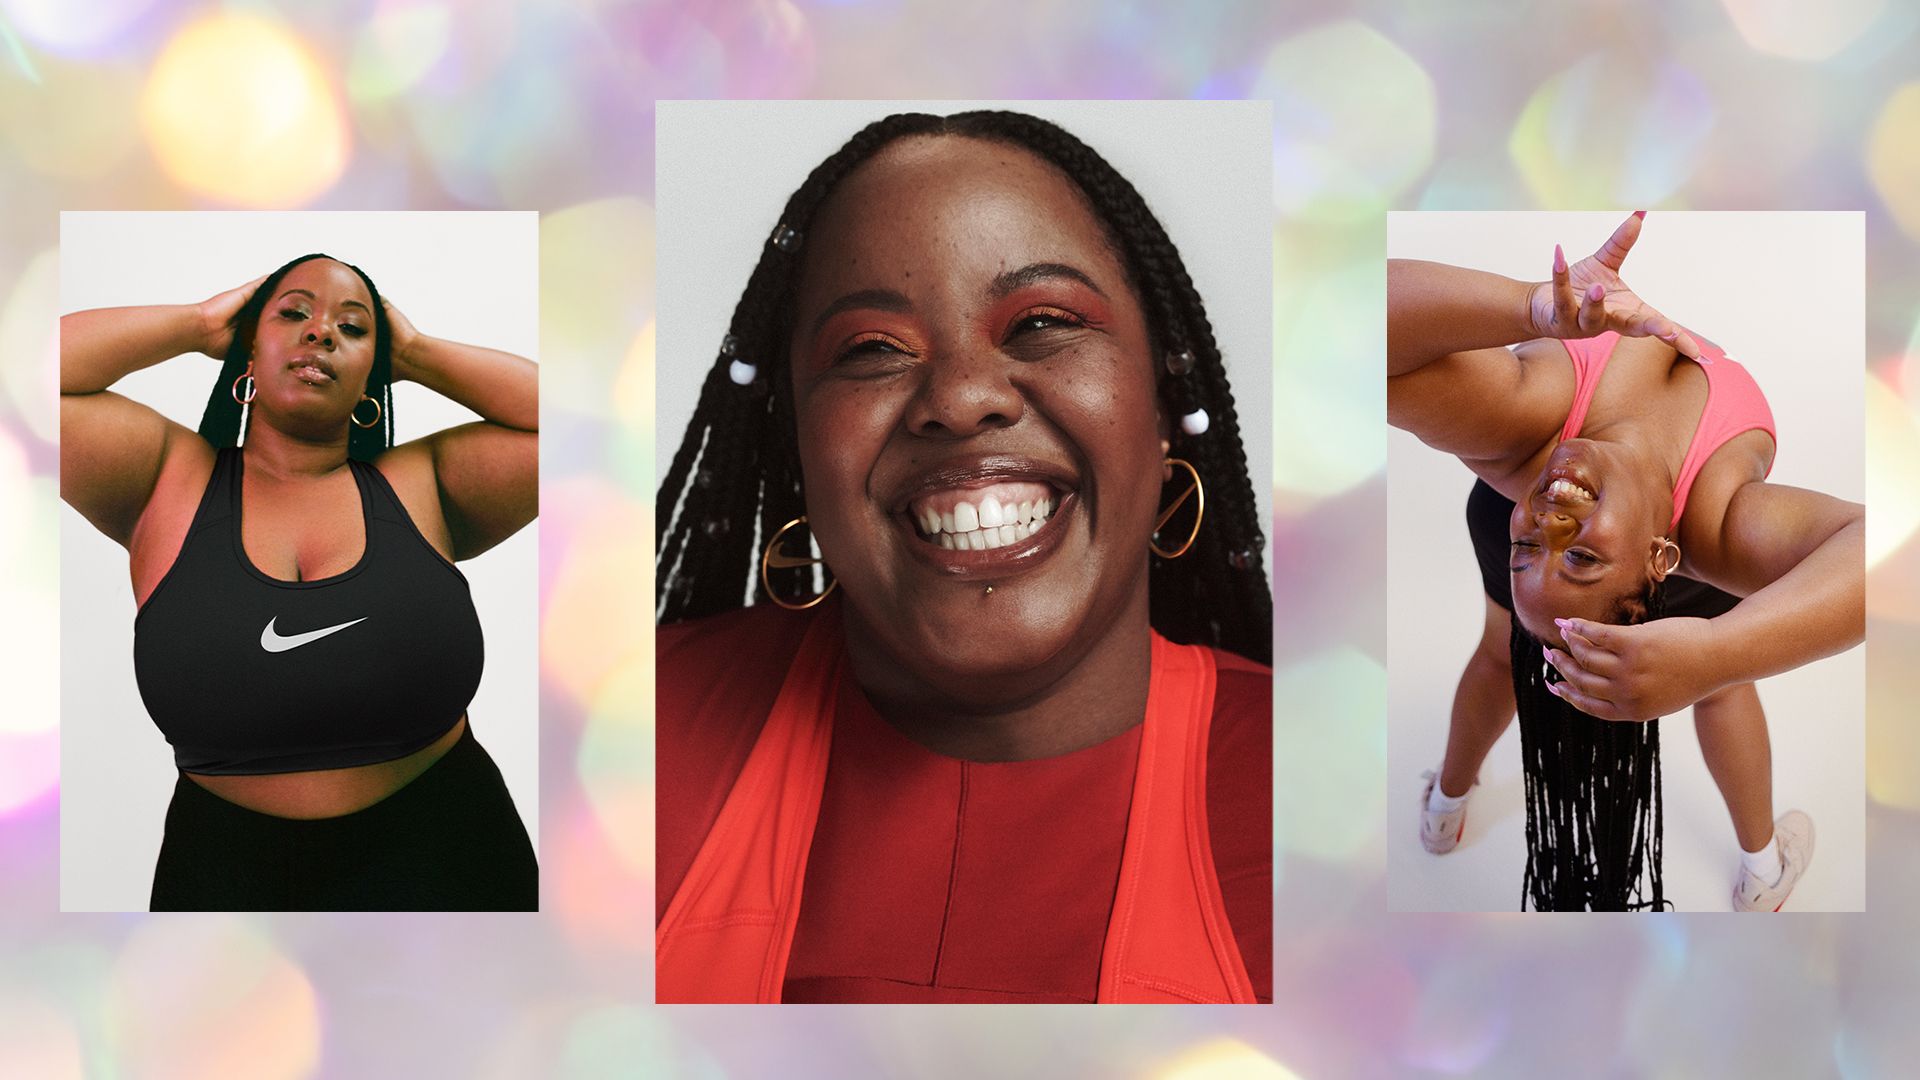 Curvy and black: the gym used to intimidate me but now I finally feel seen